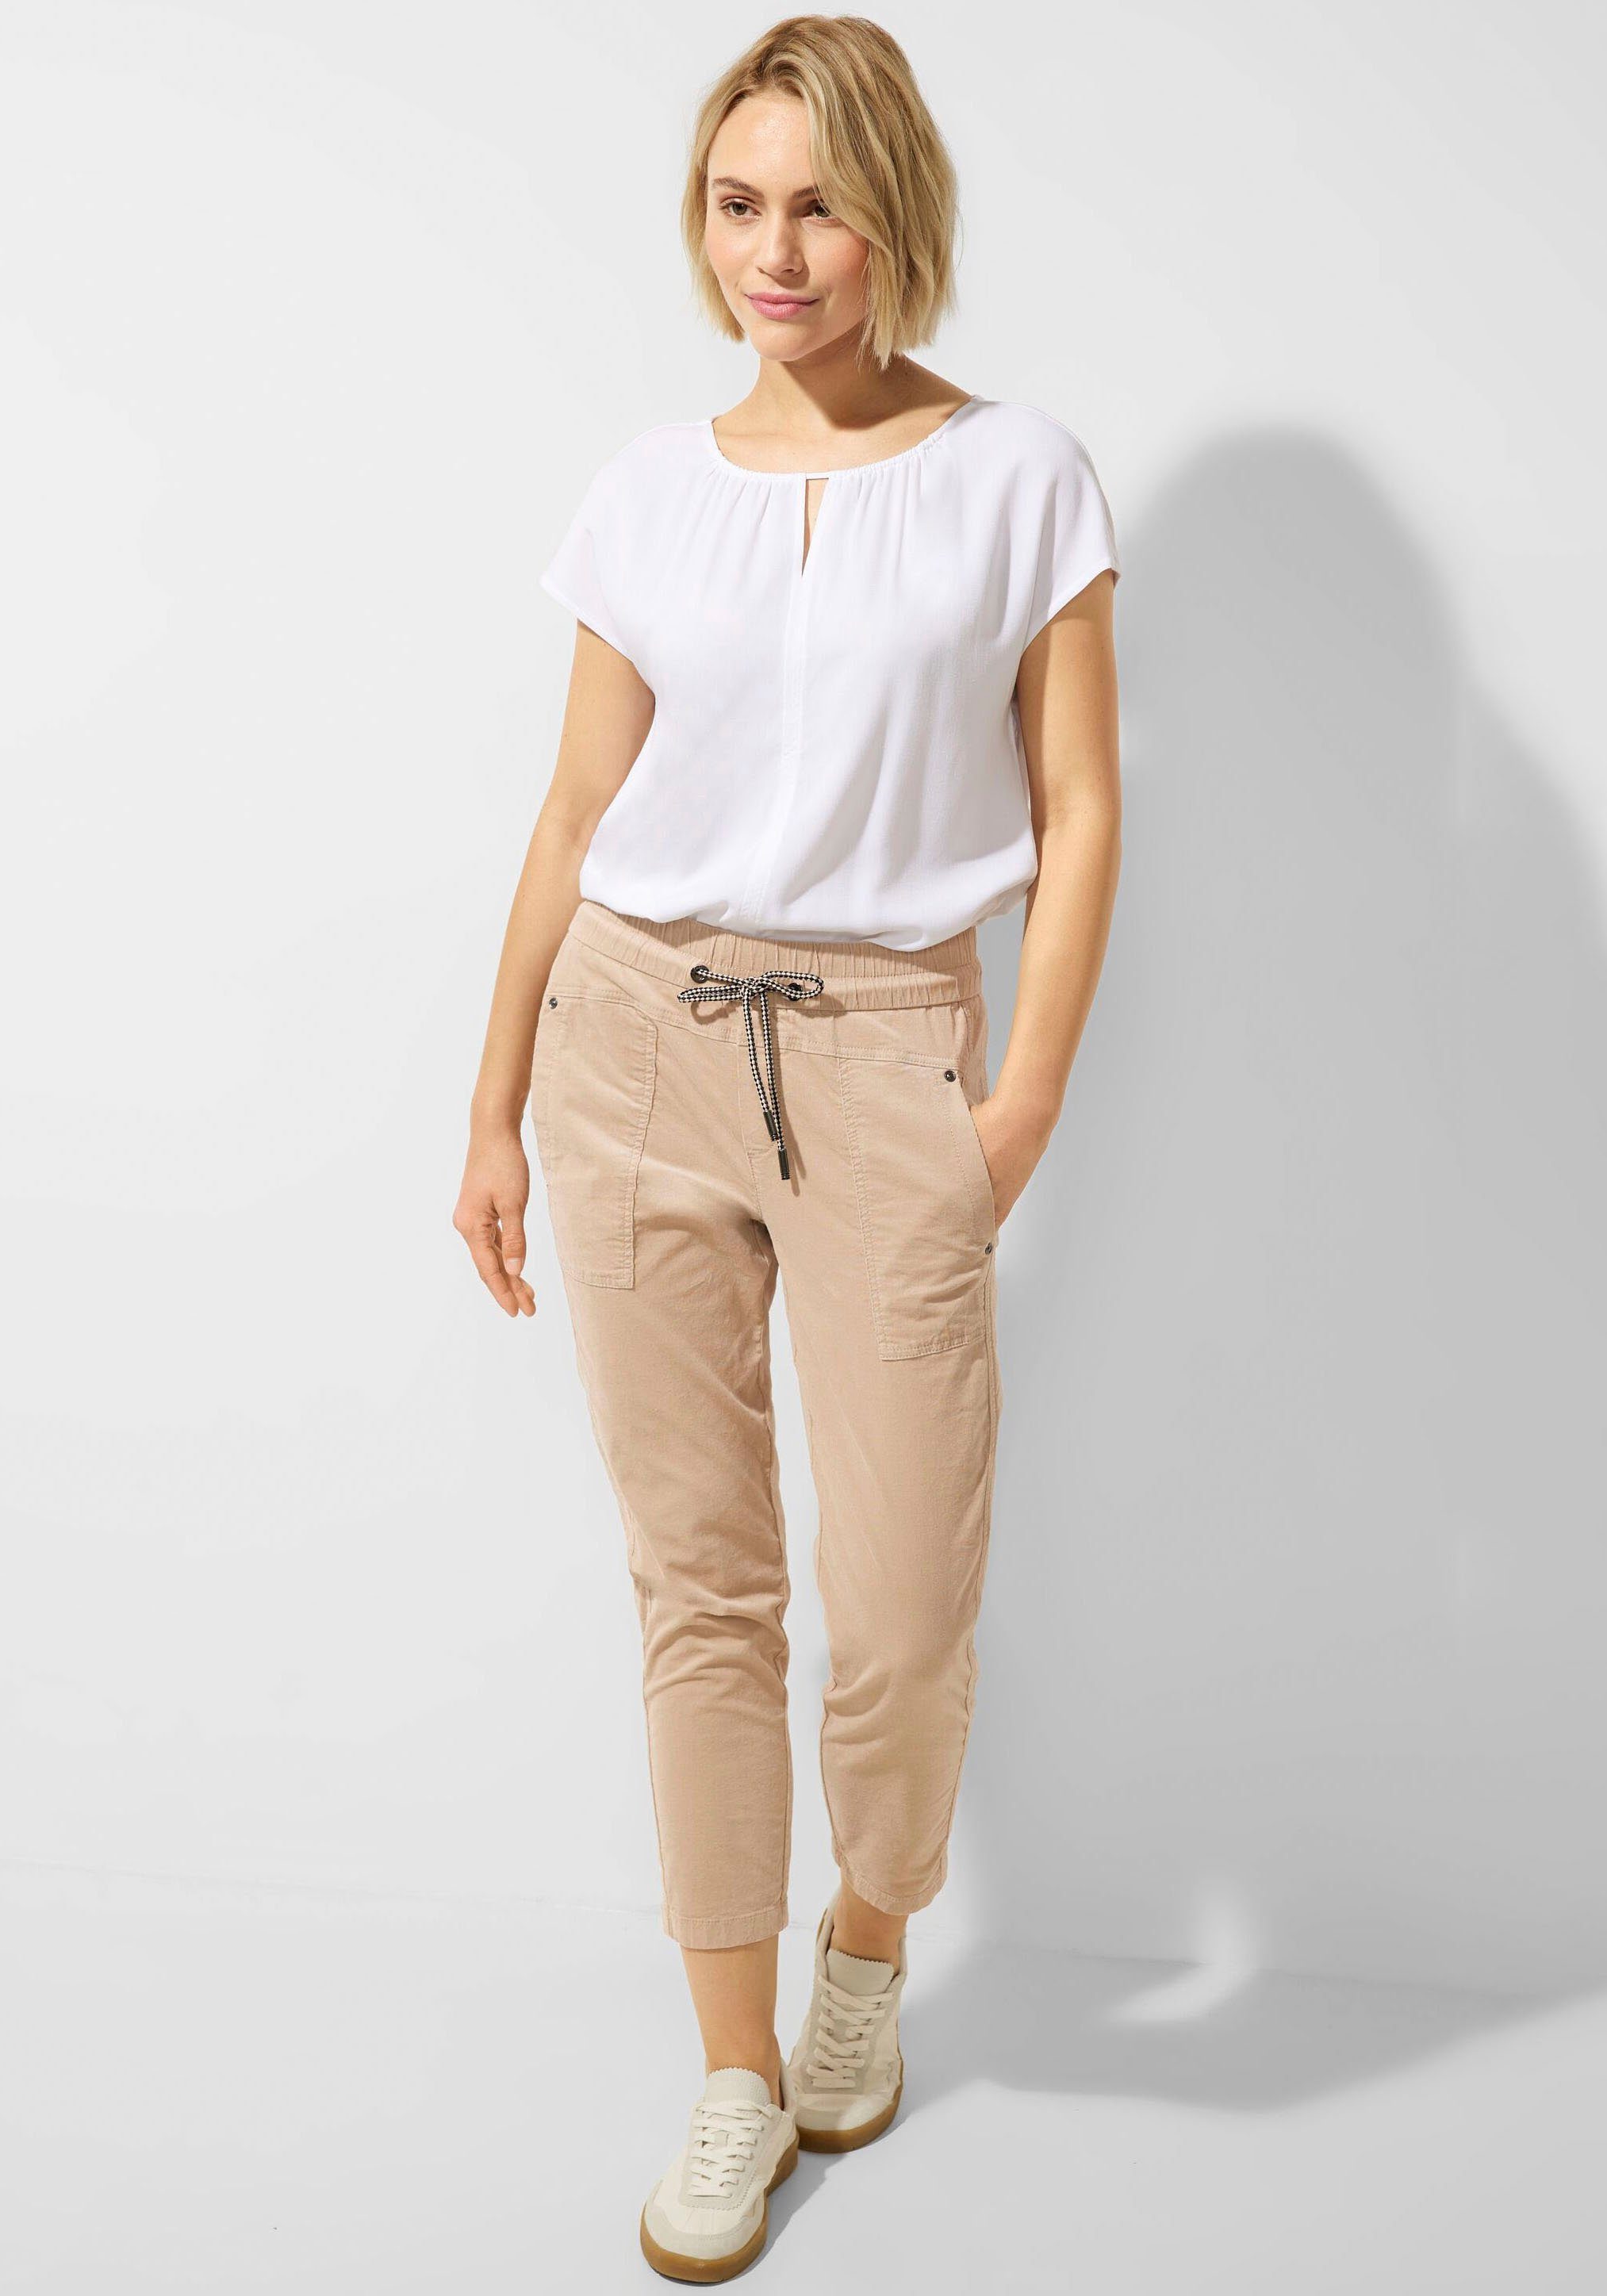 dull ONE Cordhose sand Metalllabel STREET mit bleached